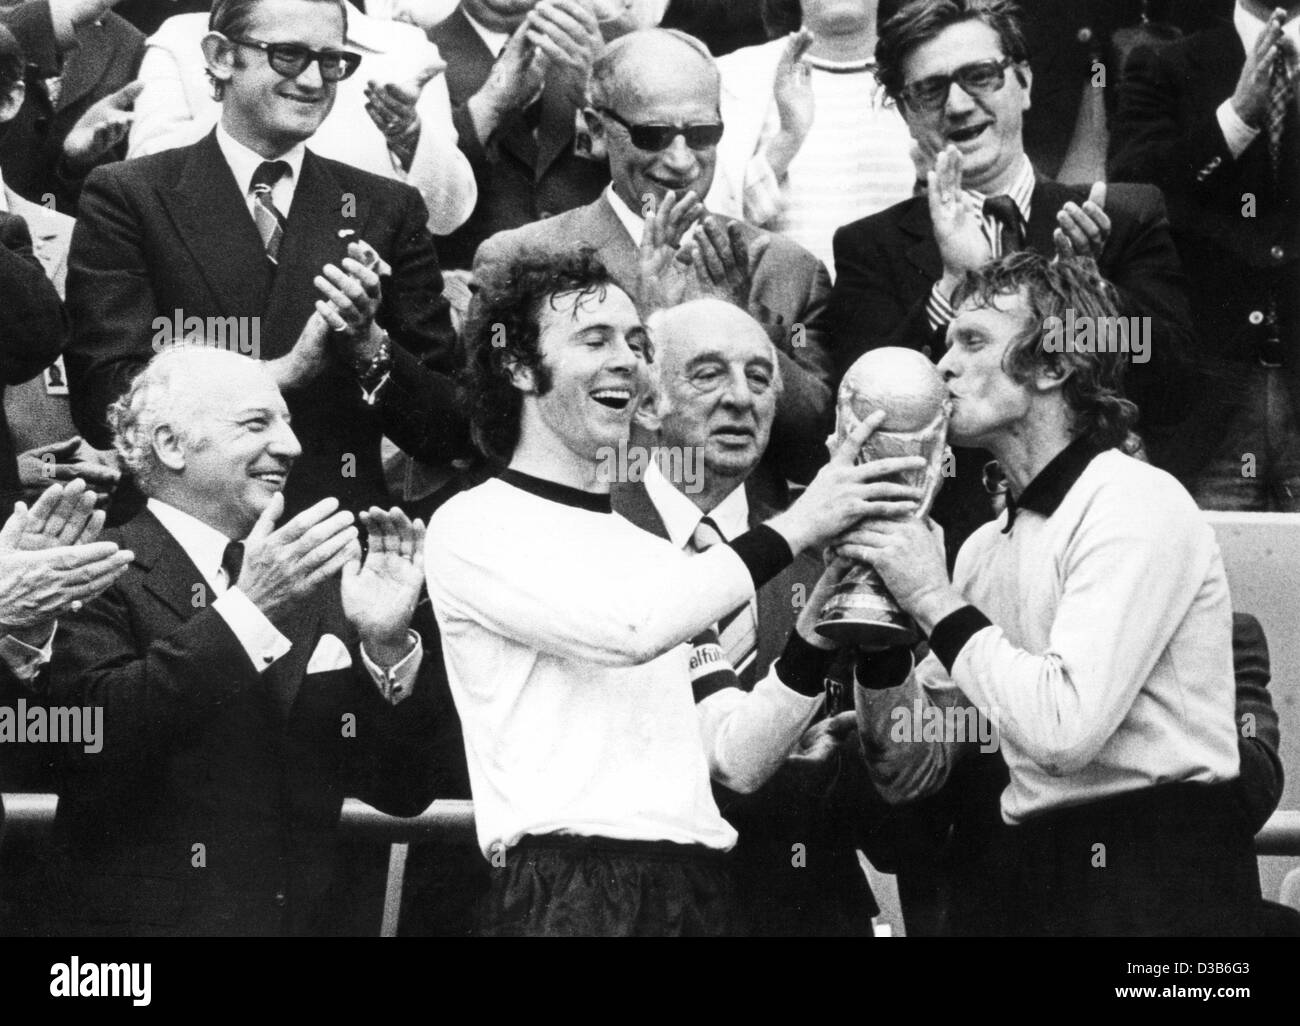 (dpa files) - Franz Beckenbauer (2nd from L), then German team captain, and goalkeeper Sepp Maier (R) cherish their trophy while German President Walter Scheel (L) applauds after Germany won the Soccer World Cup in Munich, 7 July 1974. Germany defeated the Netherlands 2:1 in the final. Stock Photo